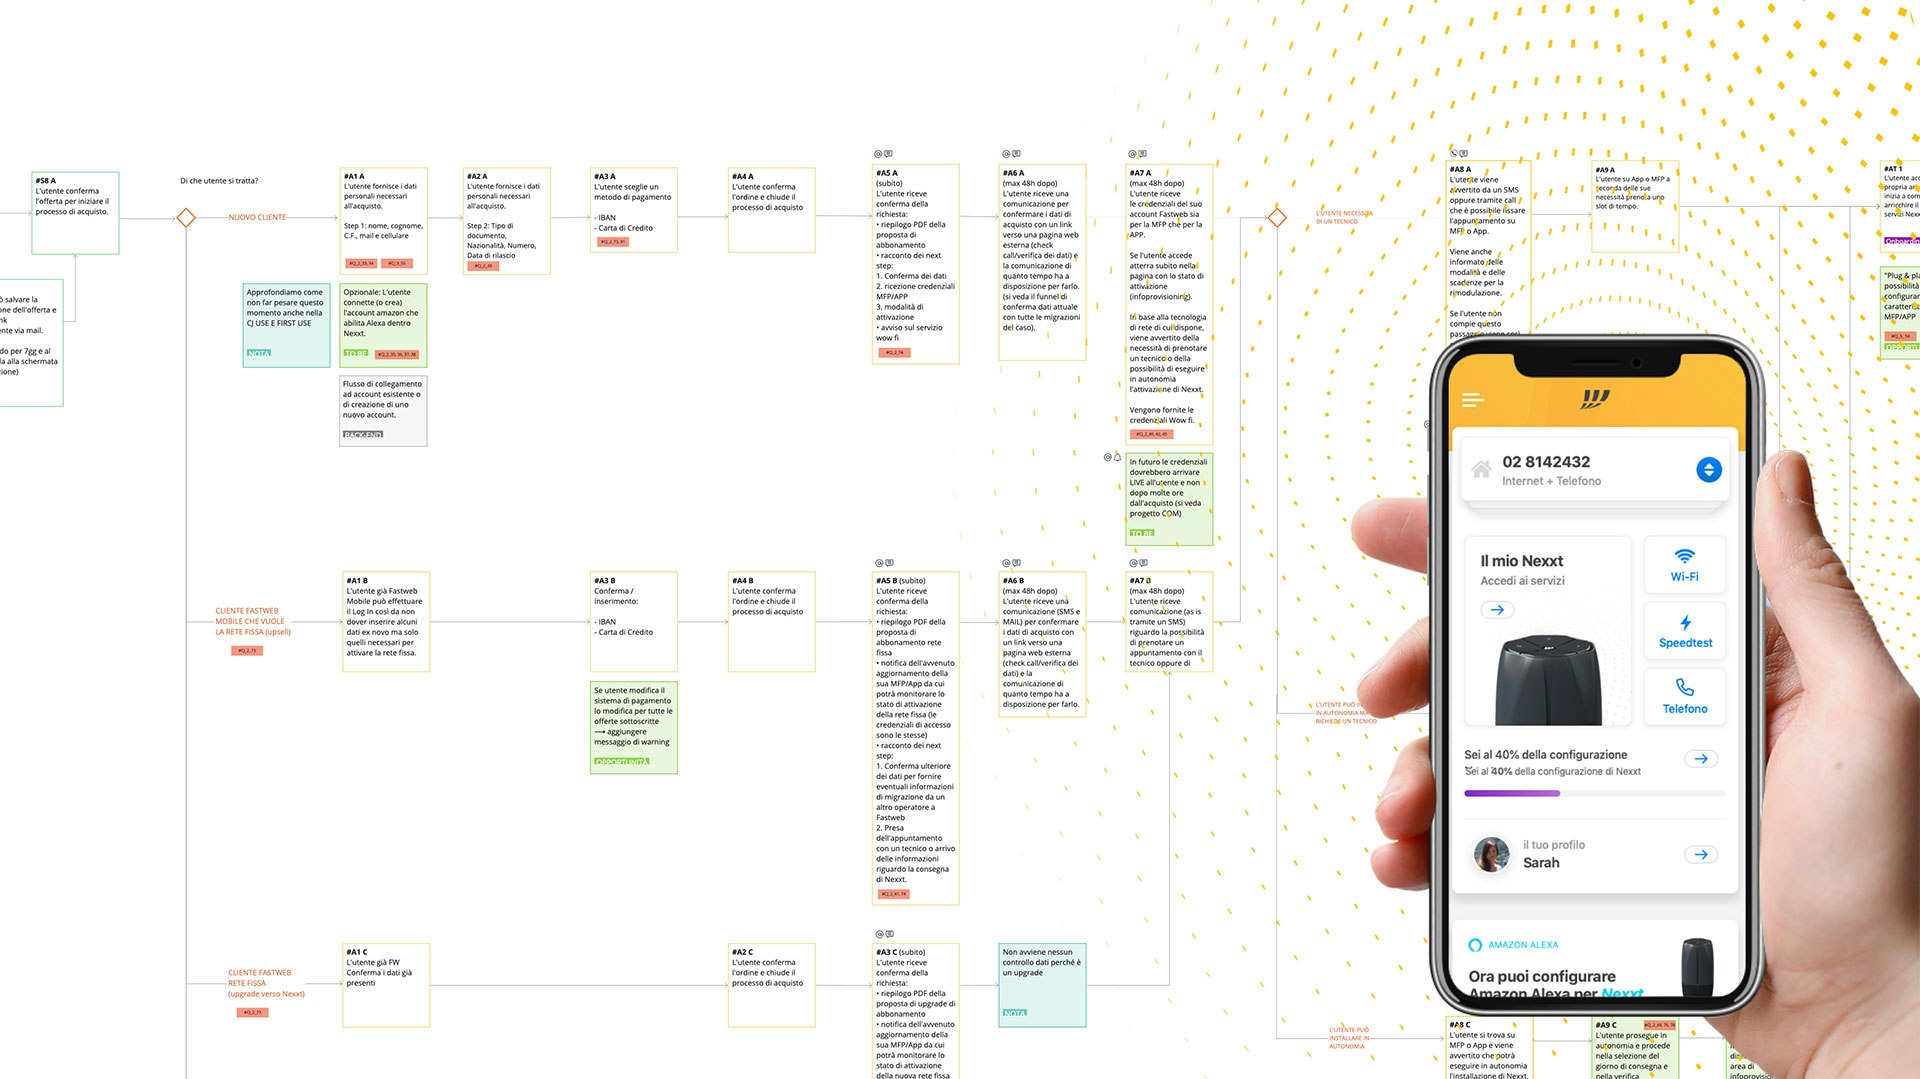 User experience mapping supported by in-app visualisation of the configuration process